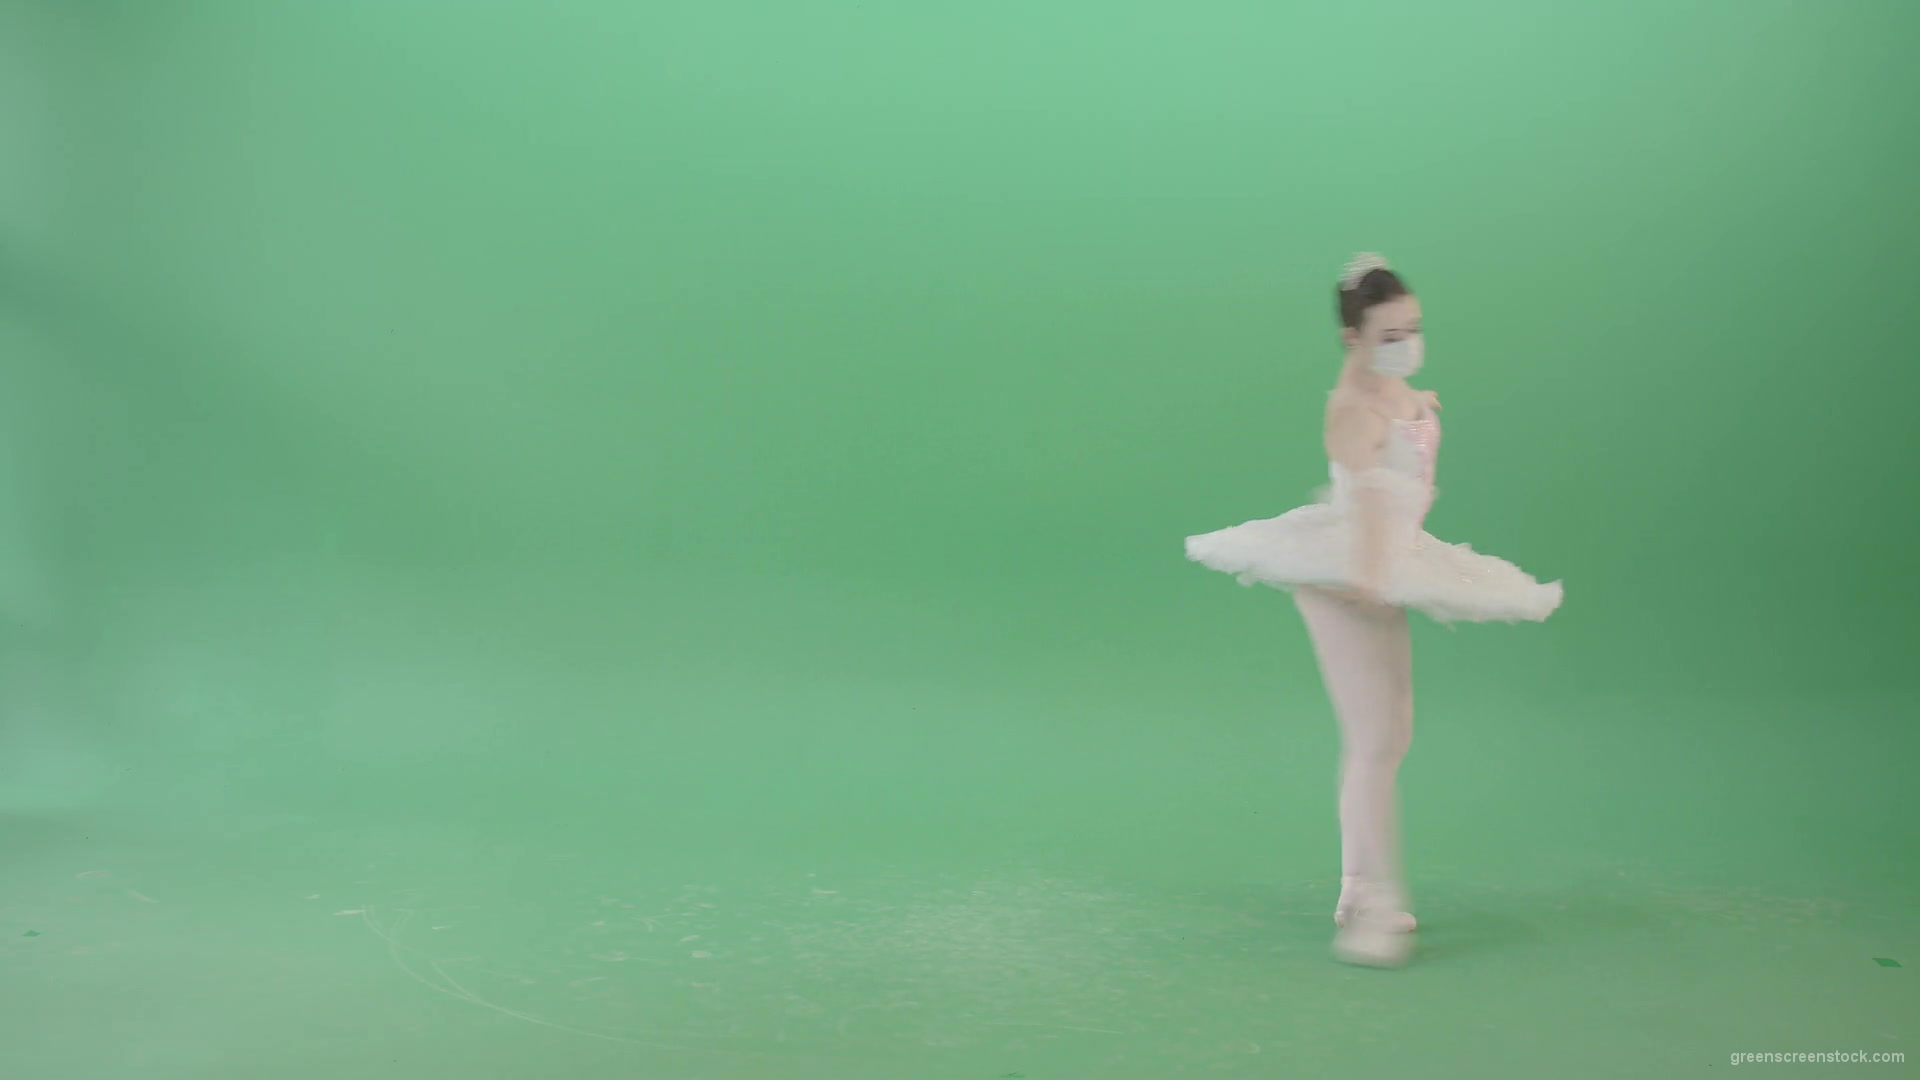 Amazing-Flowing-dance-by-Ballerina-ballet-girl-looking-for-Corona-Virus-isolated-on-Green-Screen-Viral-4K-Video-Footage-1920_005 Green Screen Stock